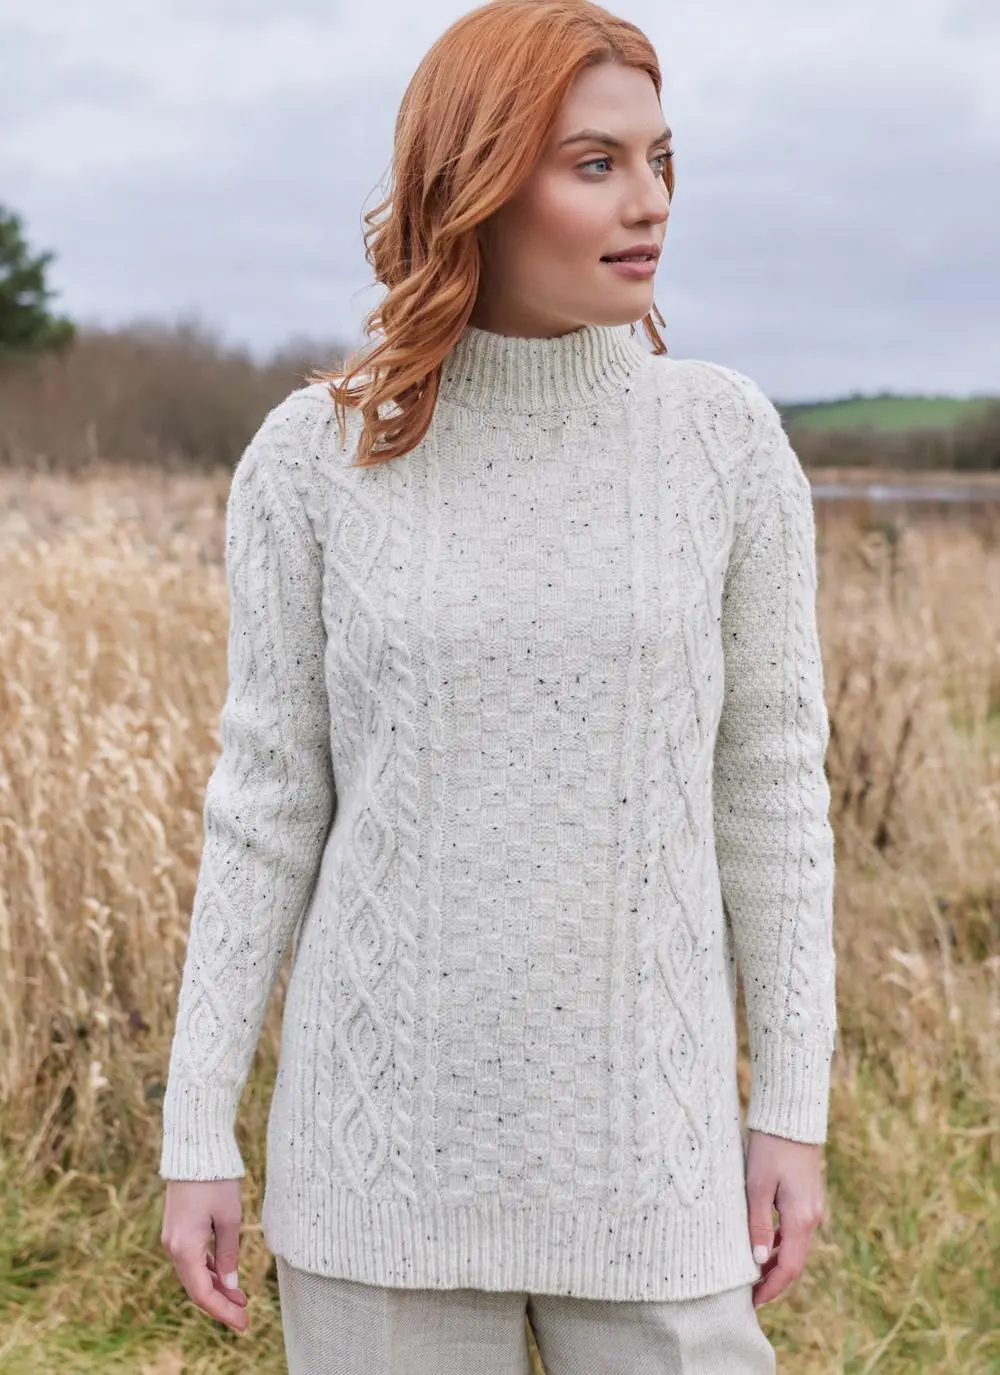 Red haired woman in field wearing ecru colored Aran turtle neck sweater looking to right